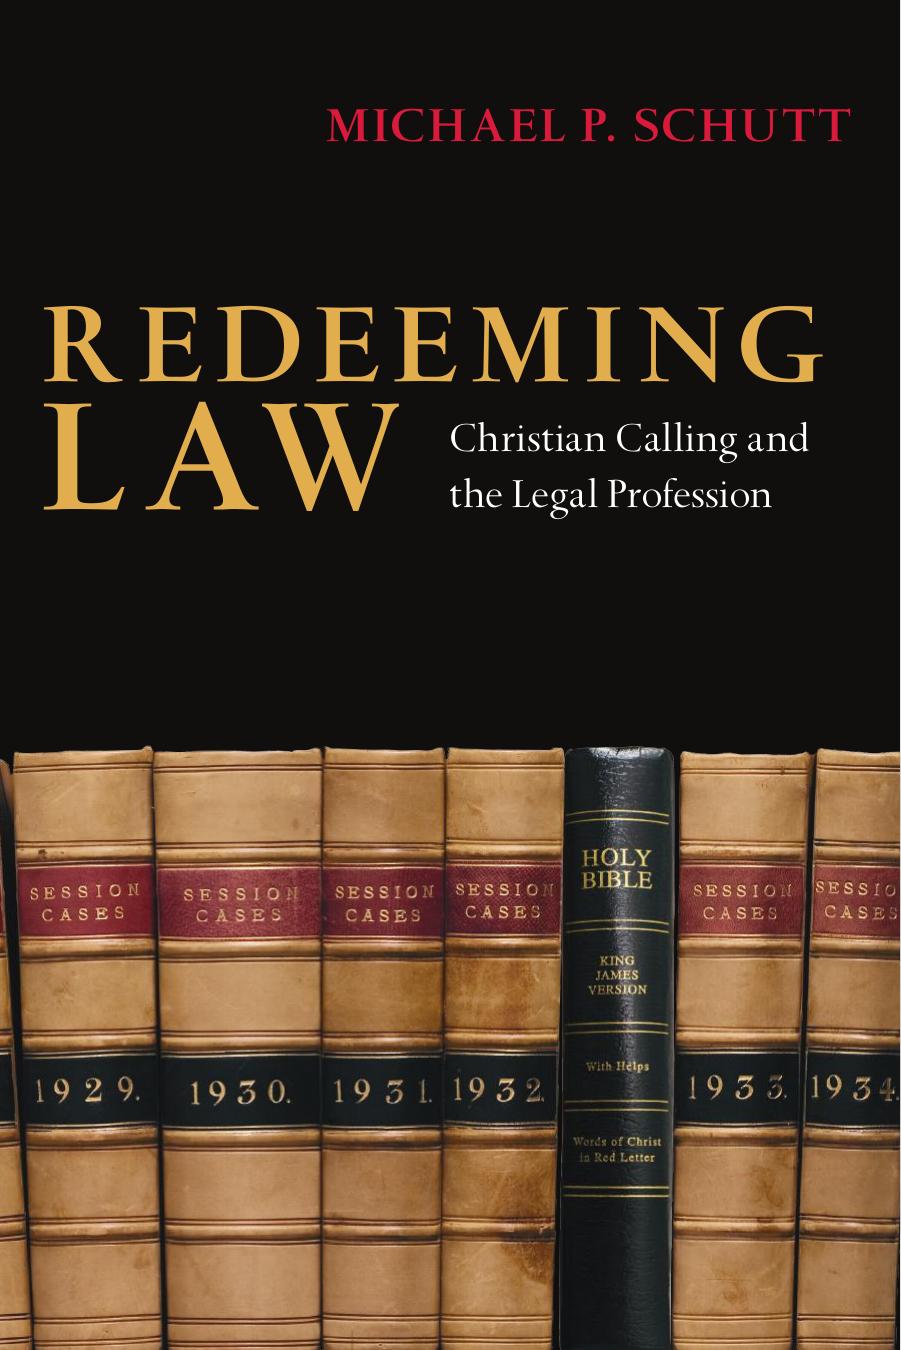 Redeeming Law : Christian Calling and the Legal Profession by Michael P. Schutt